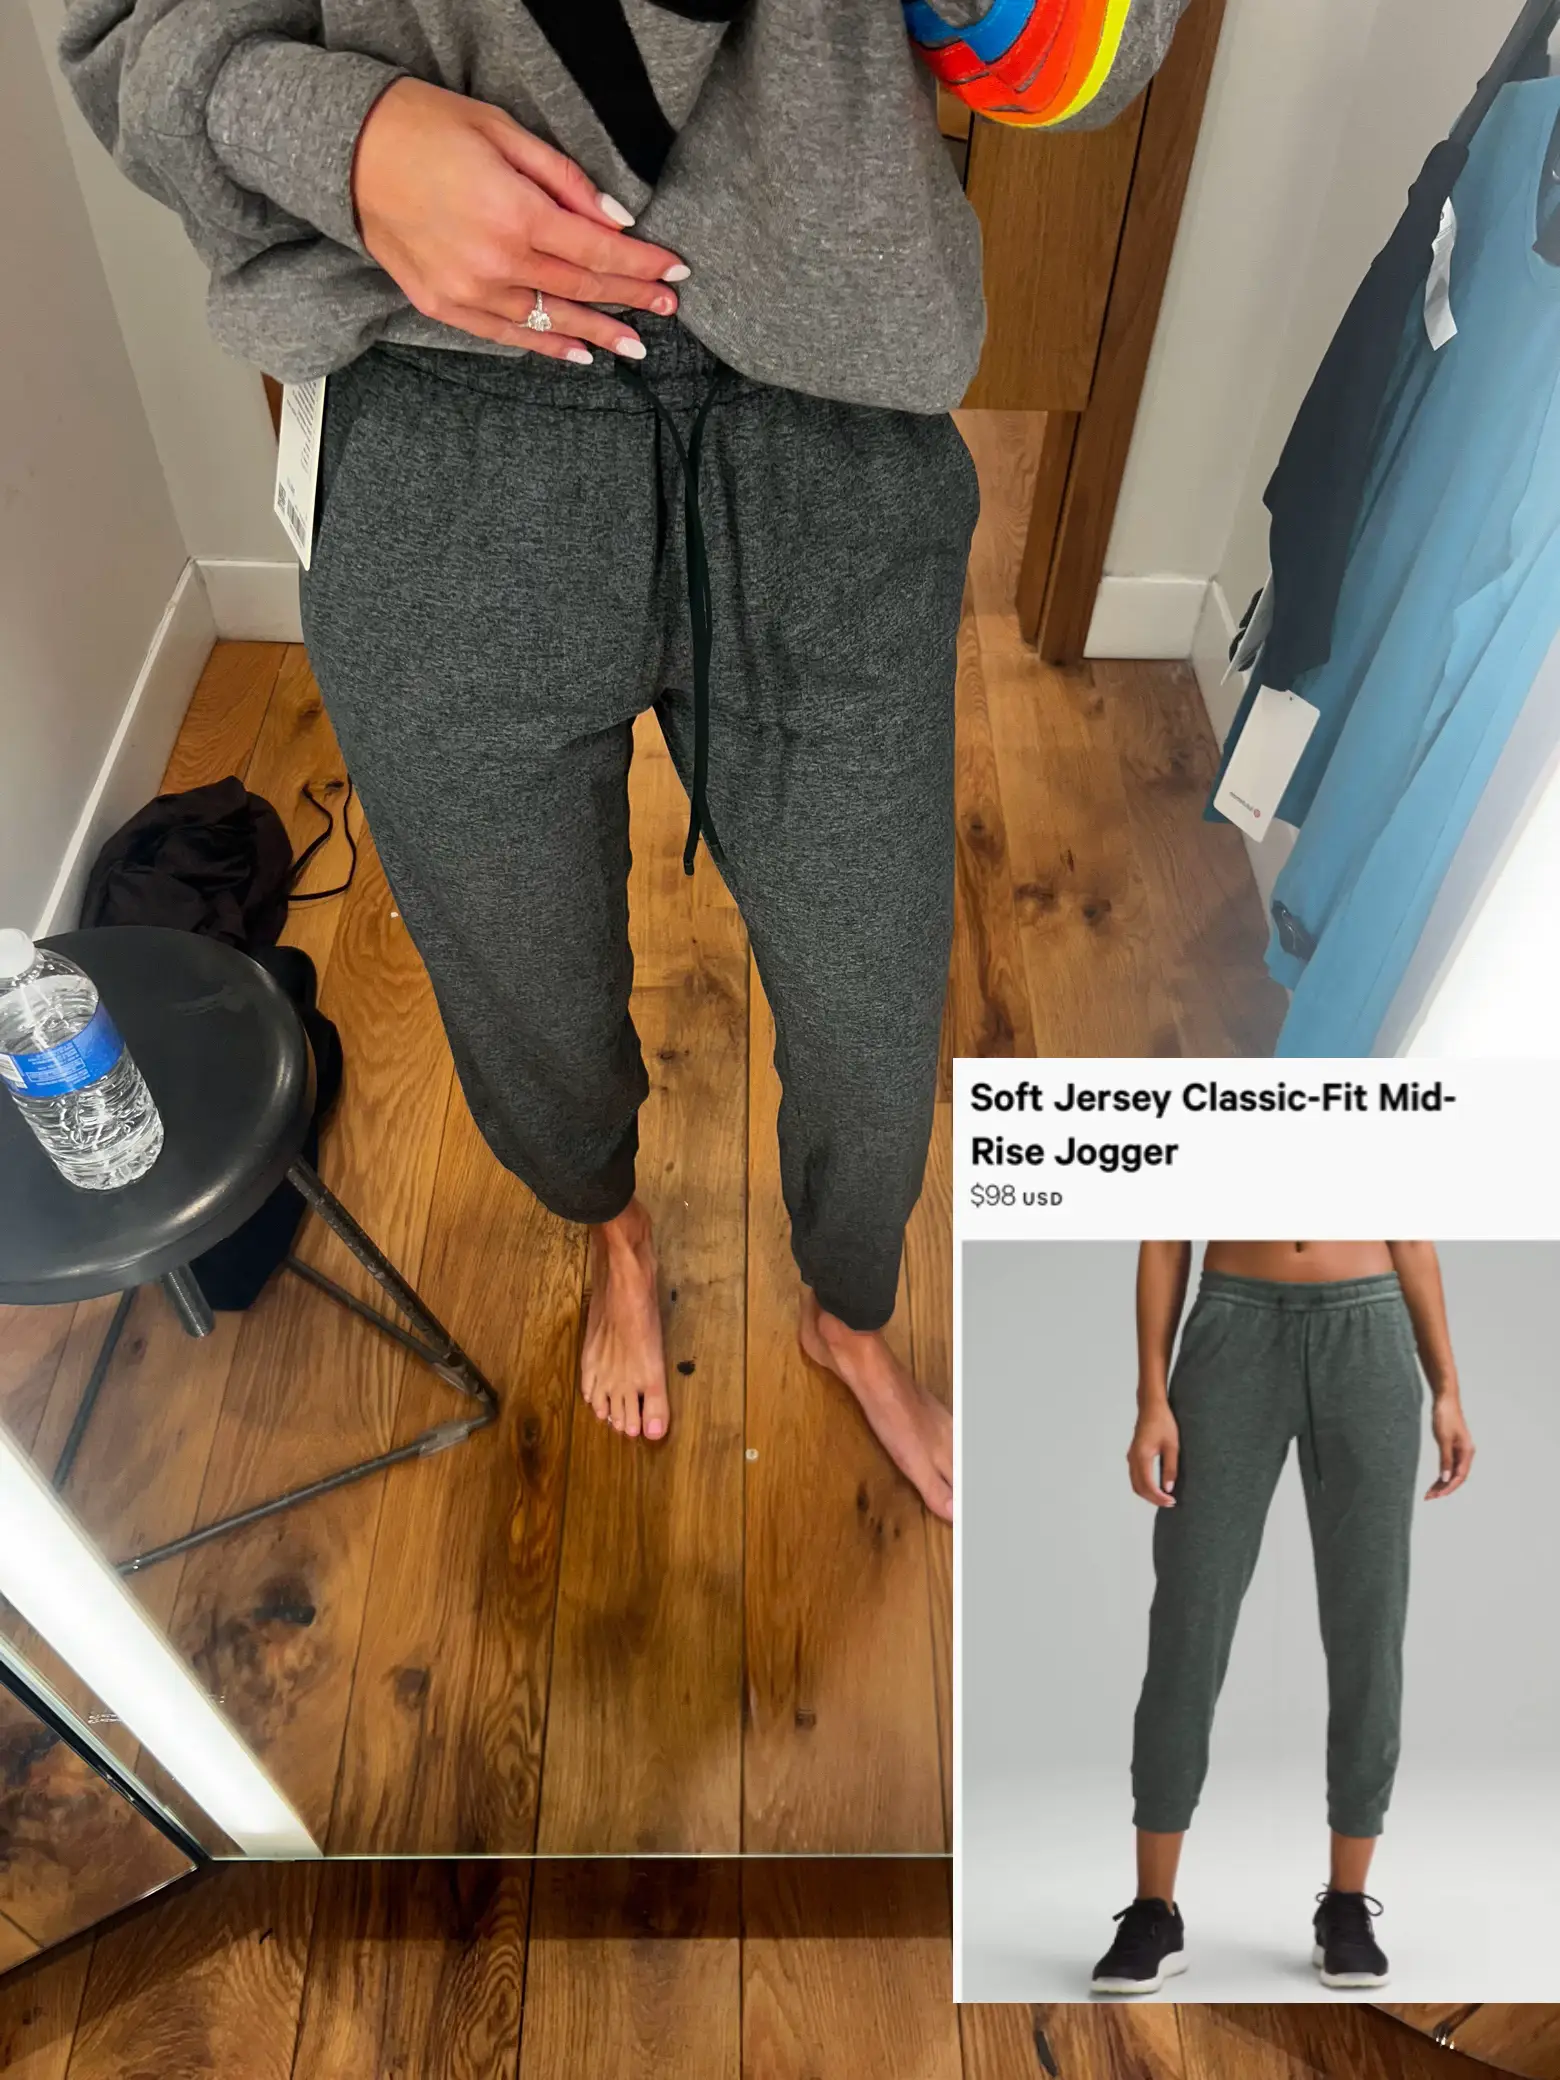 Lululemons soft jersey fit mid rise jogger is the perfect length